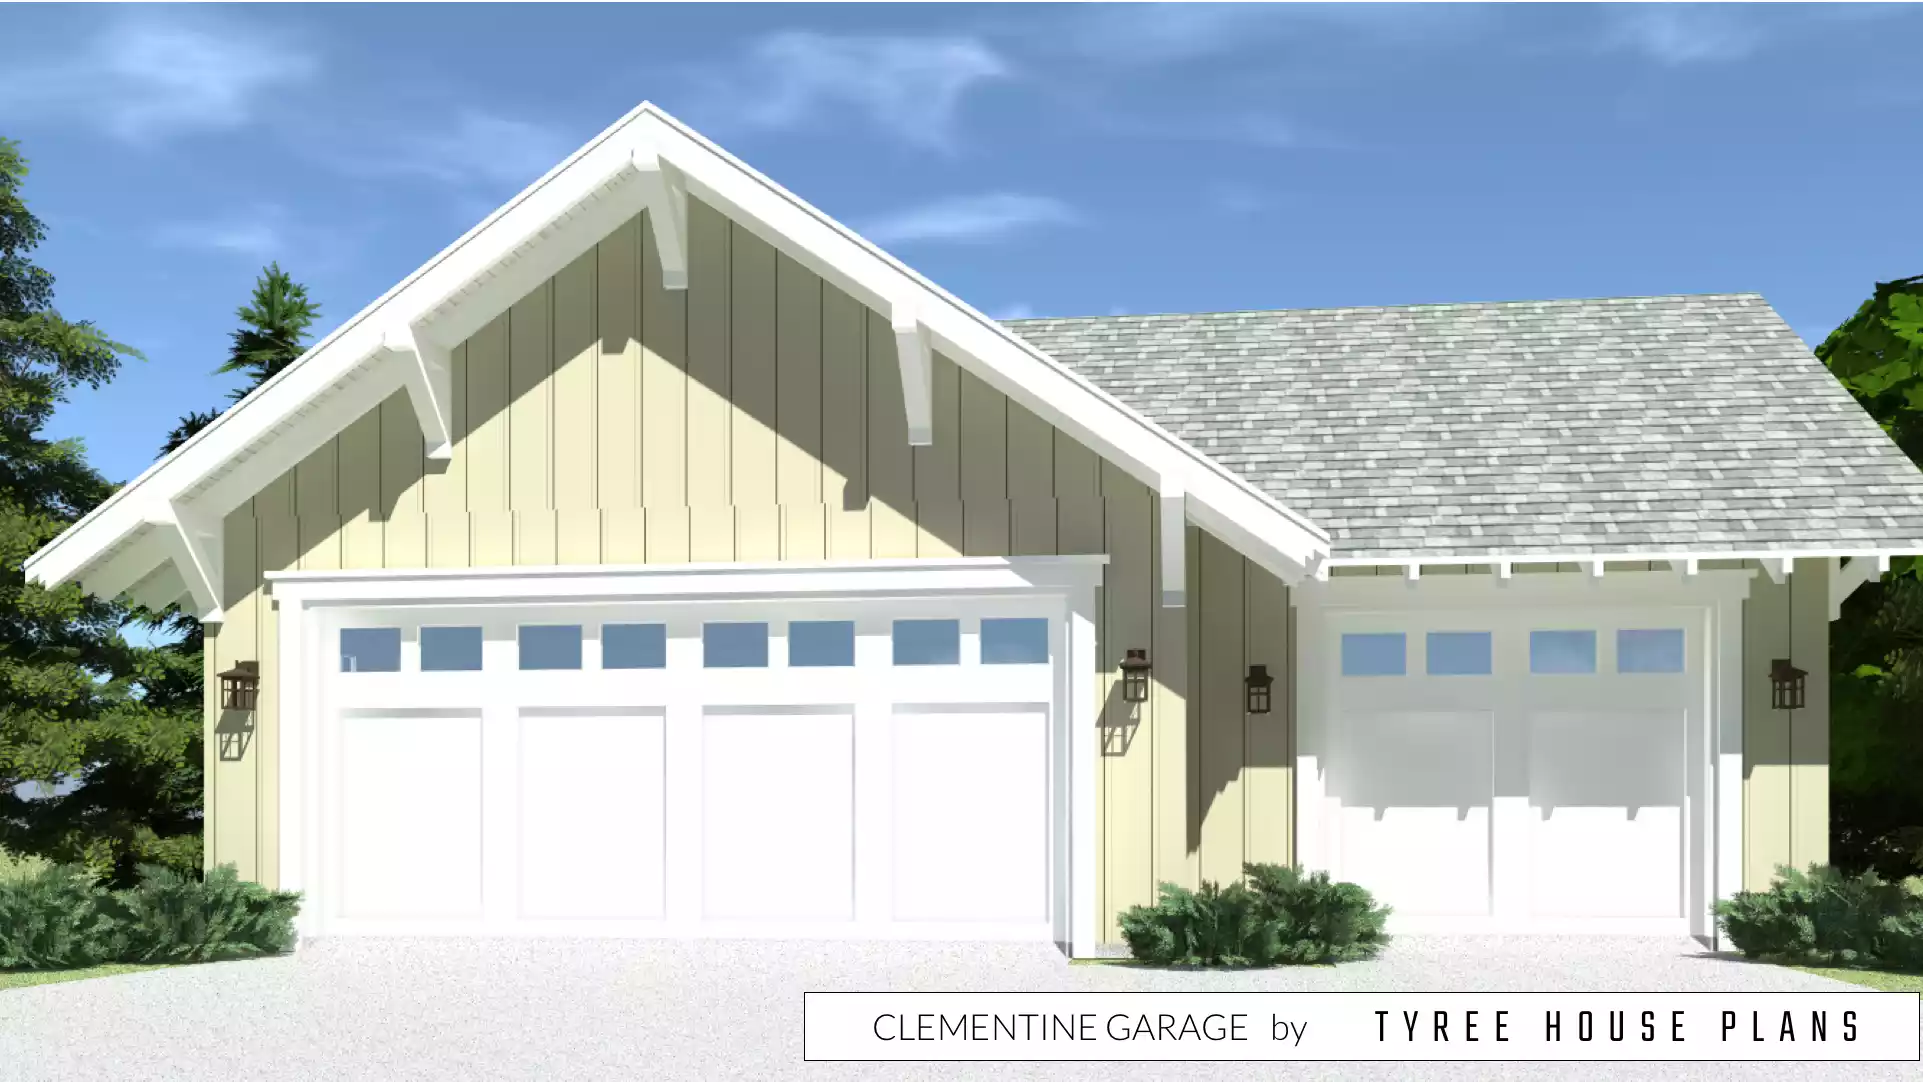 Clementine Garage by Tyree House Plans